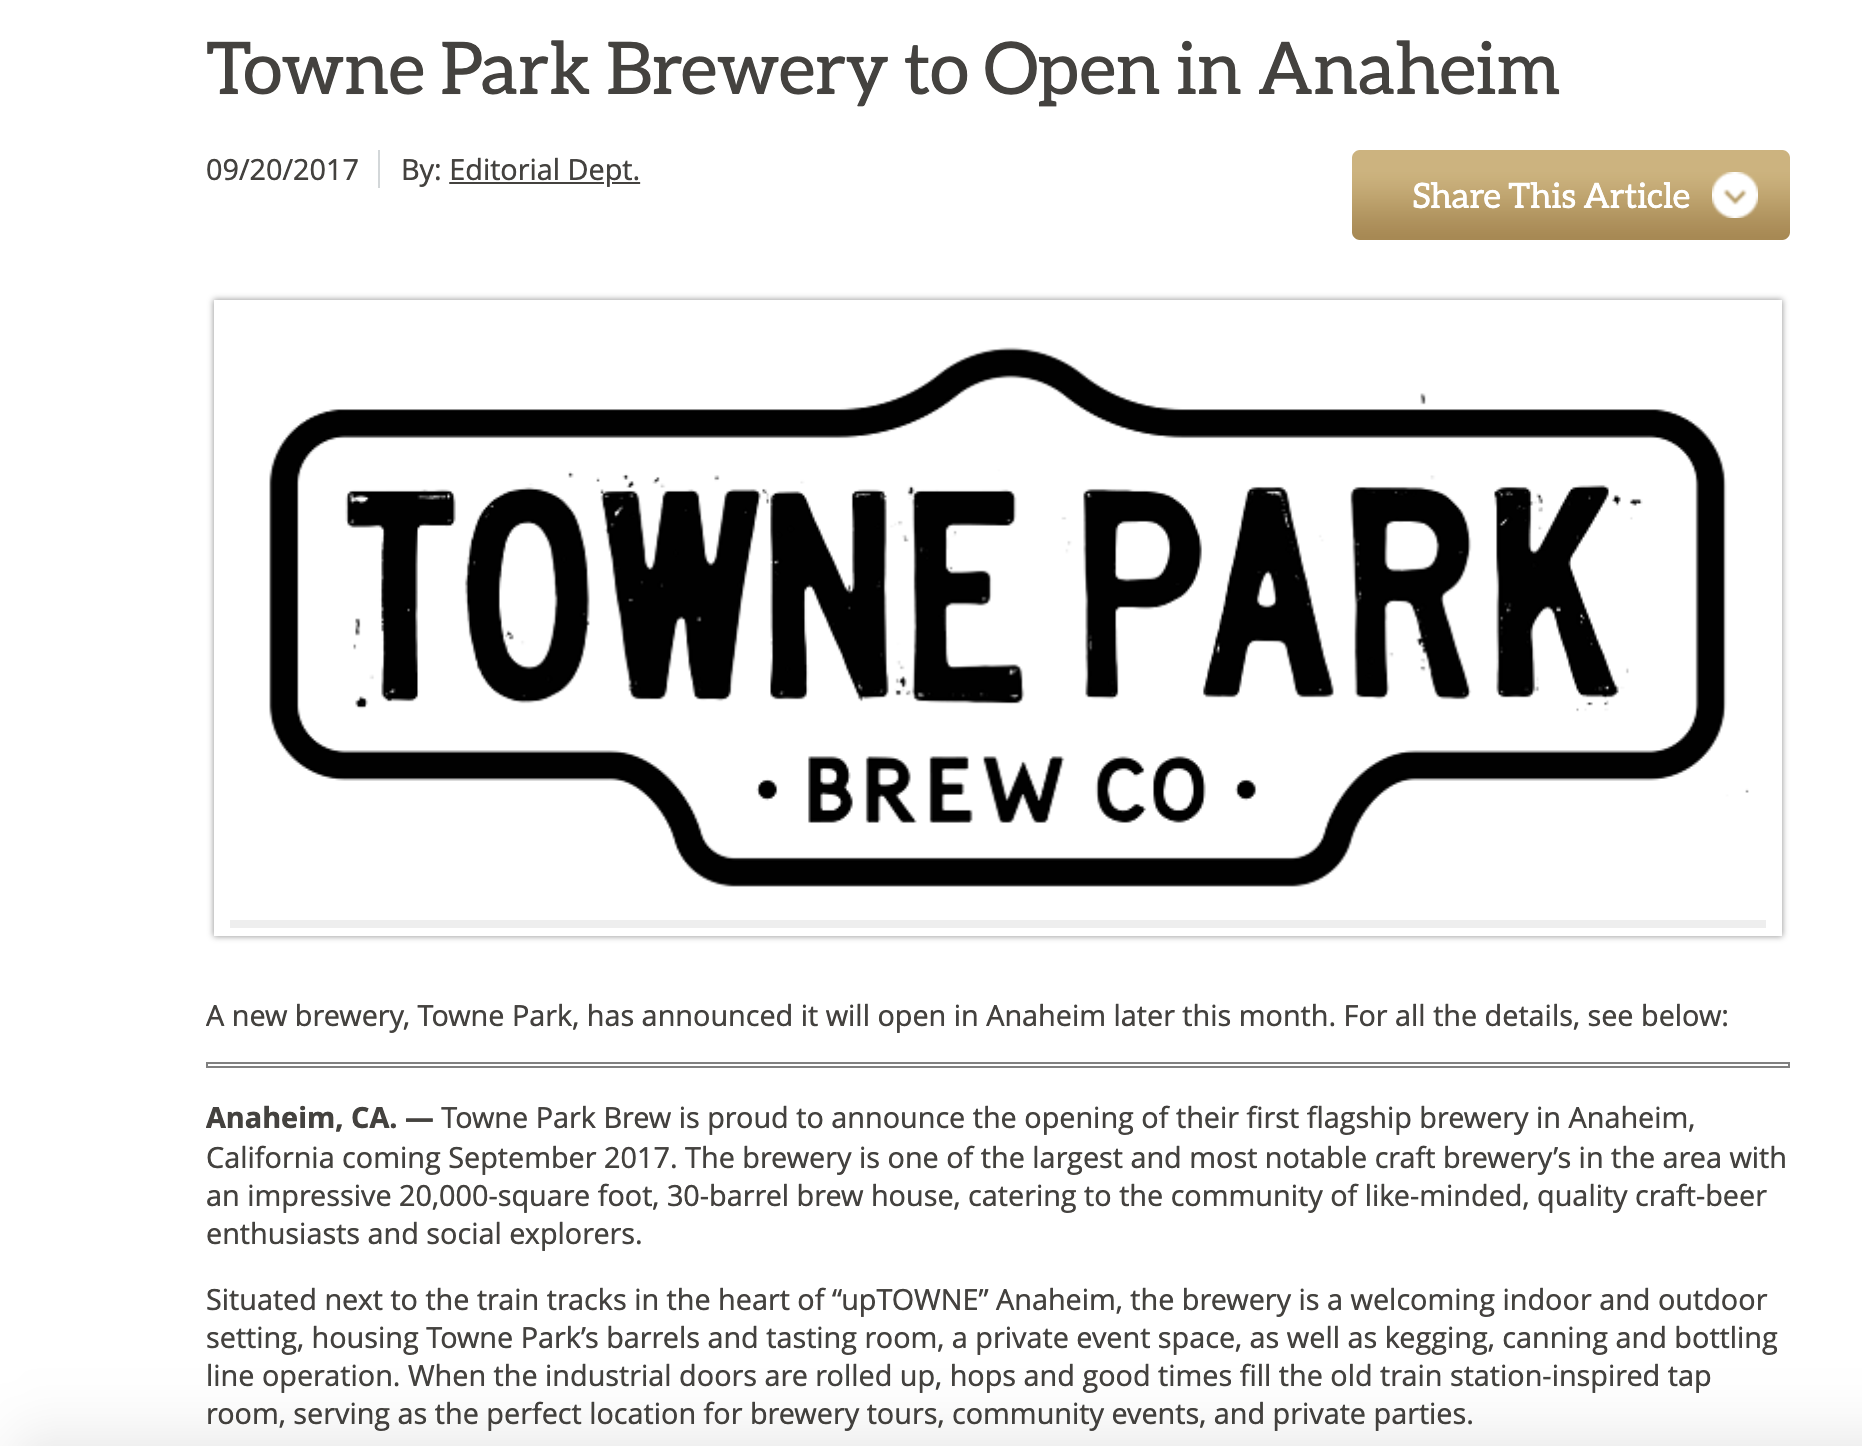 Towne Park brew news about new opening